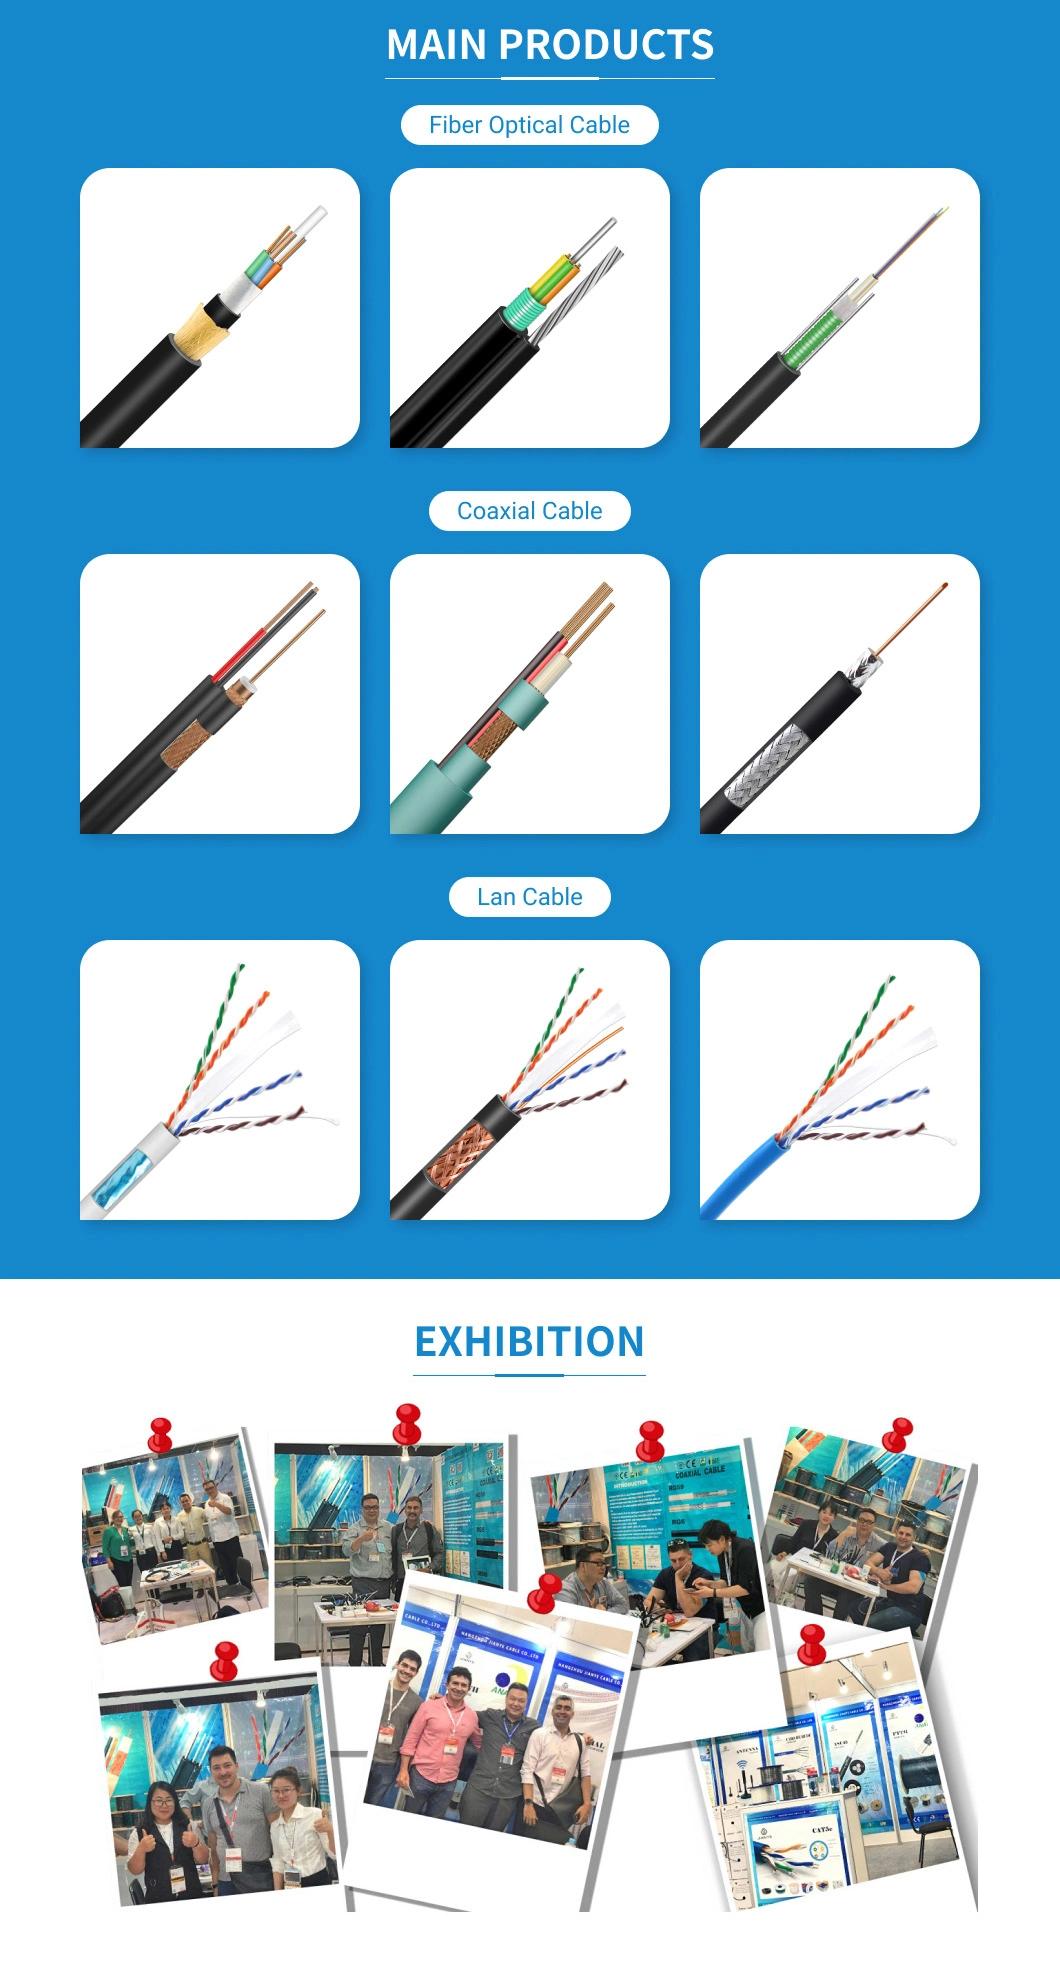 Electrical Resistance at Sheath All Dielectic Self Supported Outdoor Aerial Fiber Optic ADSS Cable